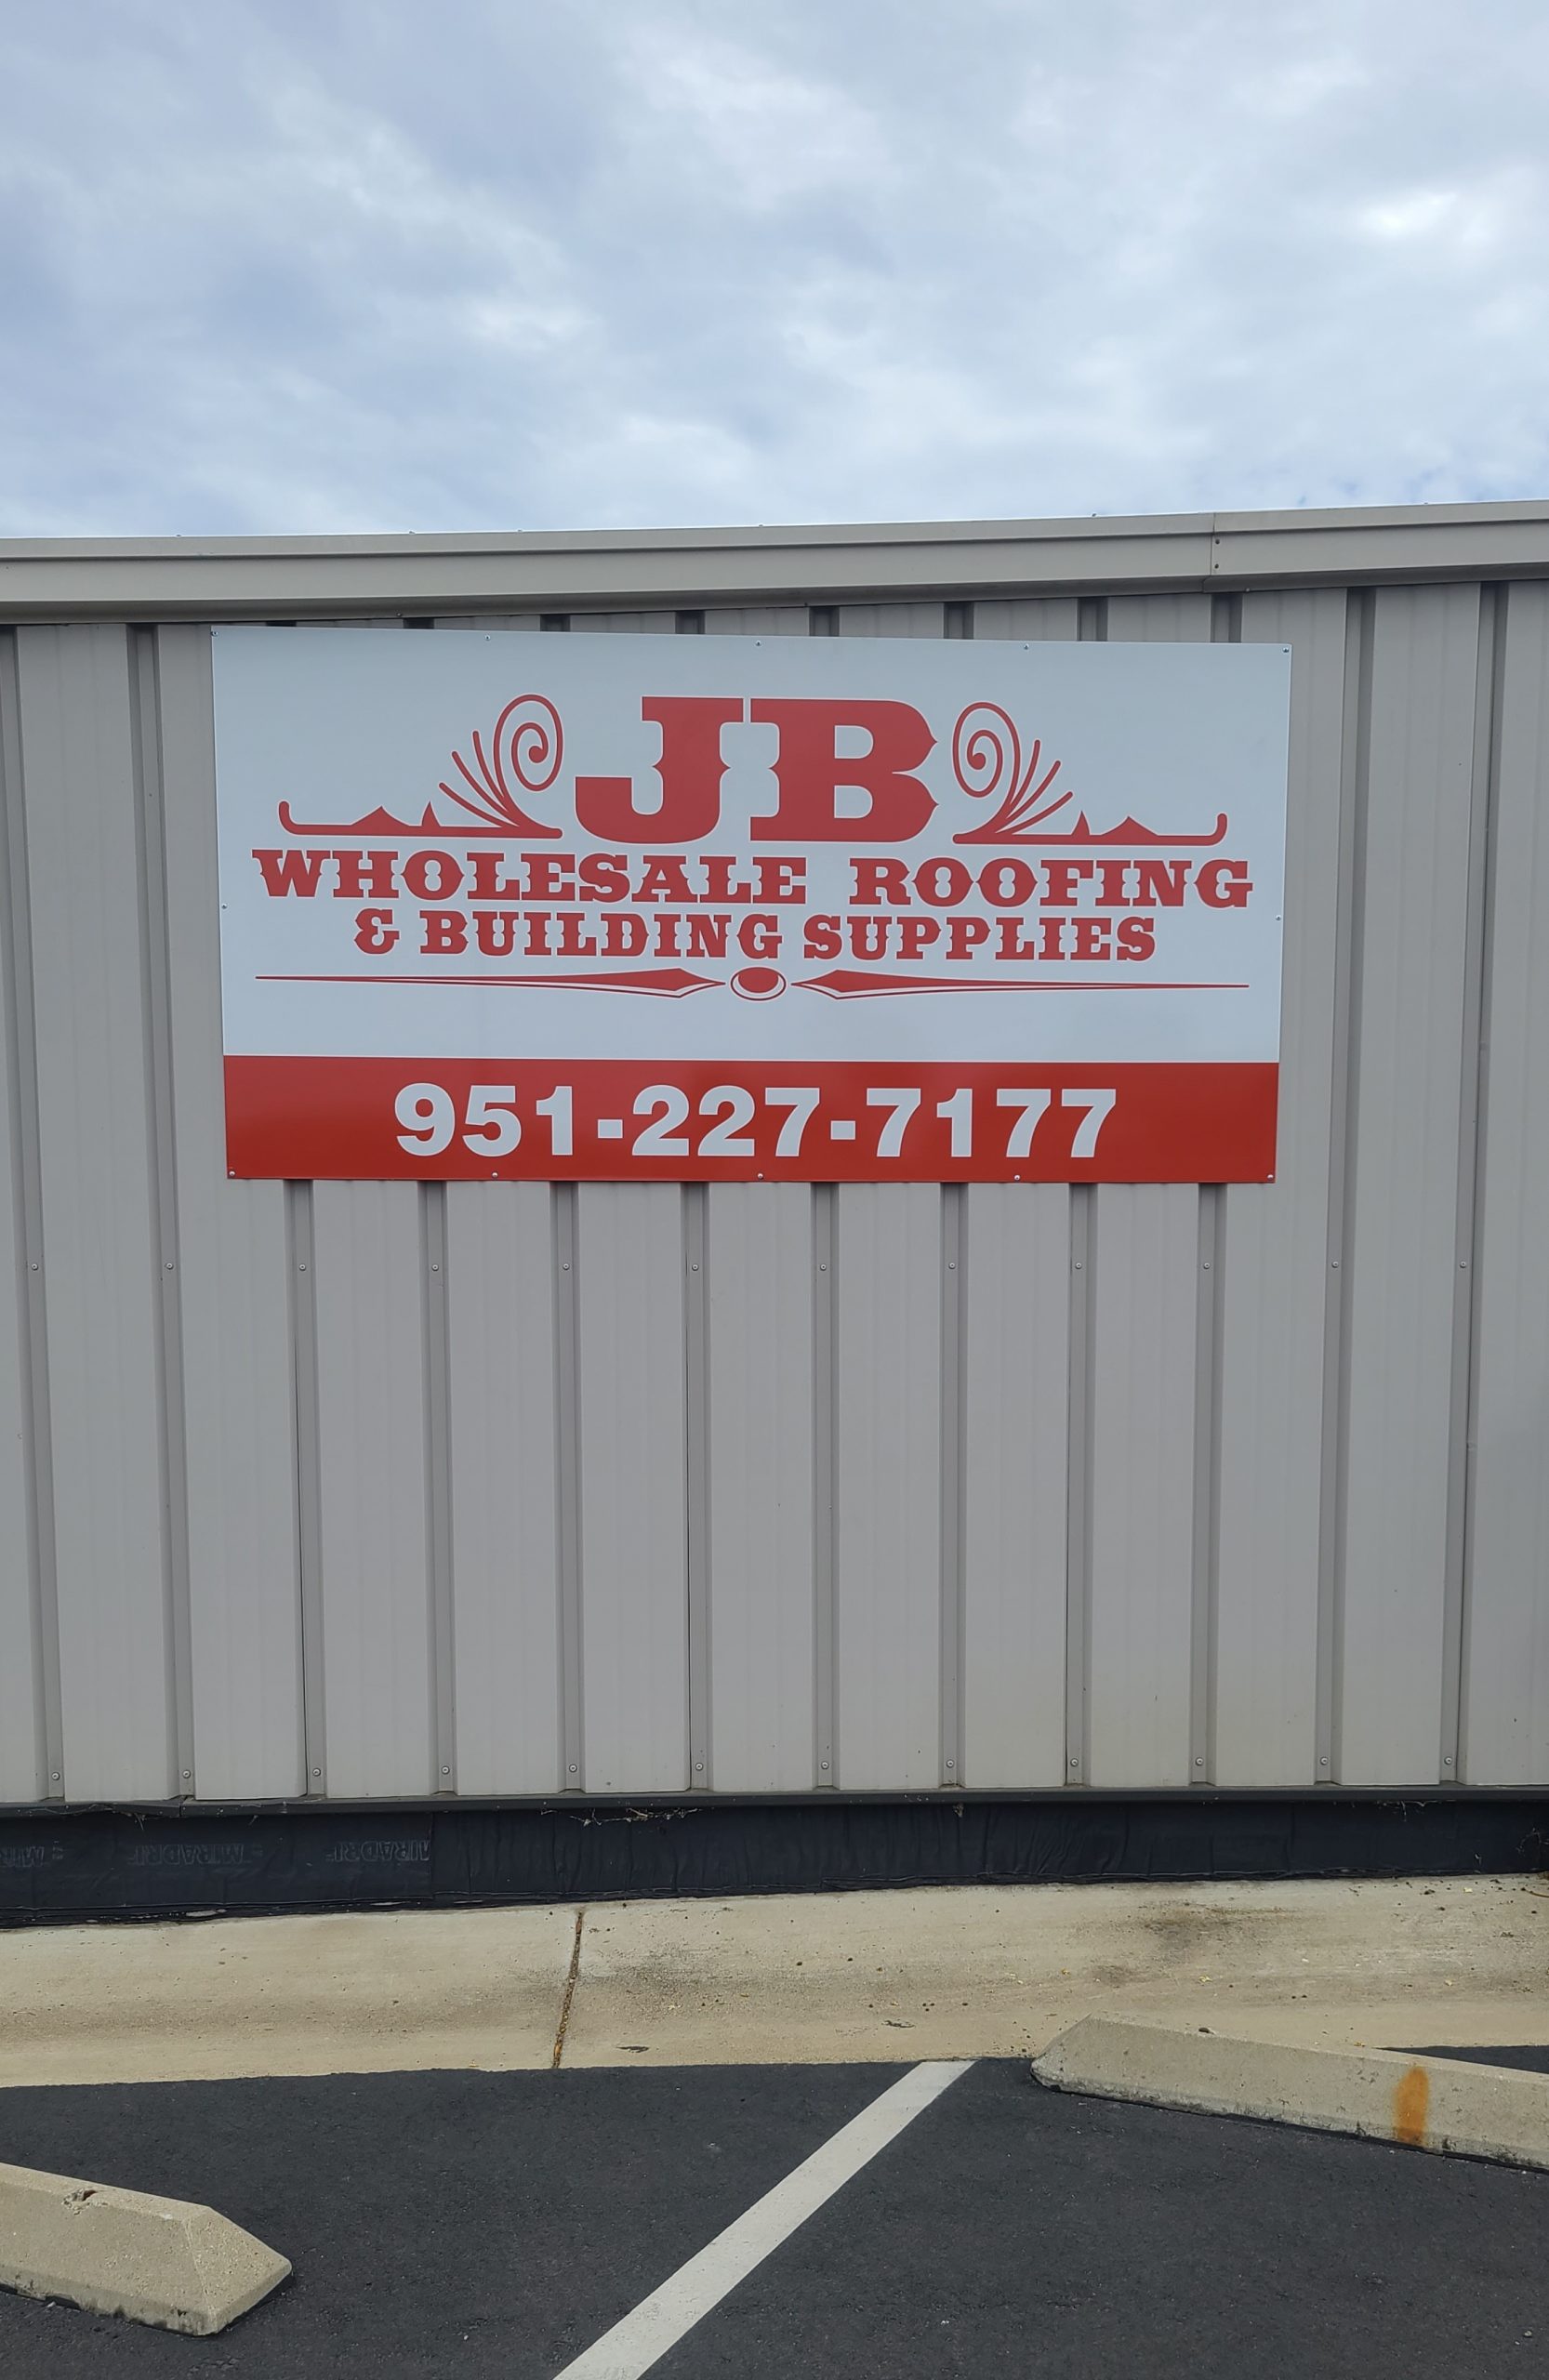 You are currently viewing Metal Panel Sign for for JB Wholesale Roofing’s Parking Lot in Murrieta